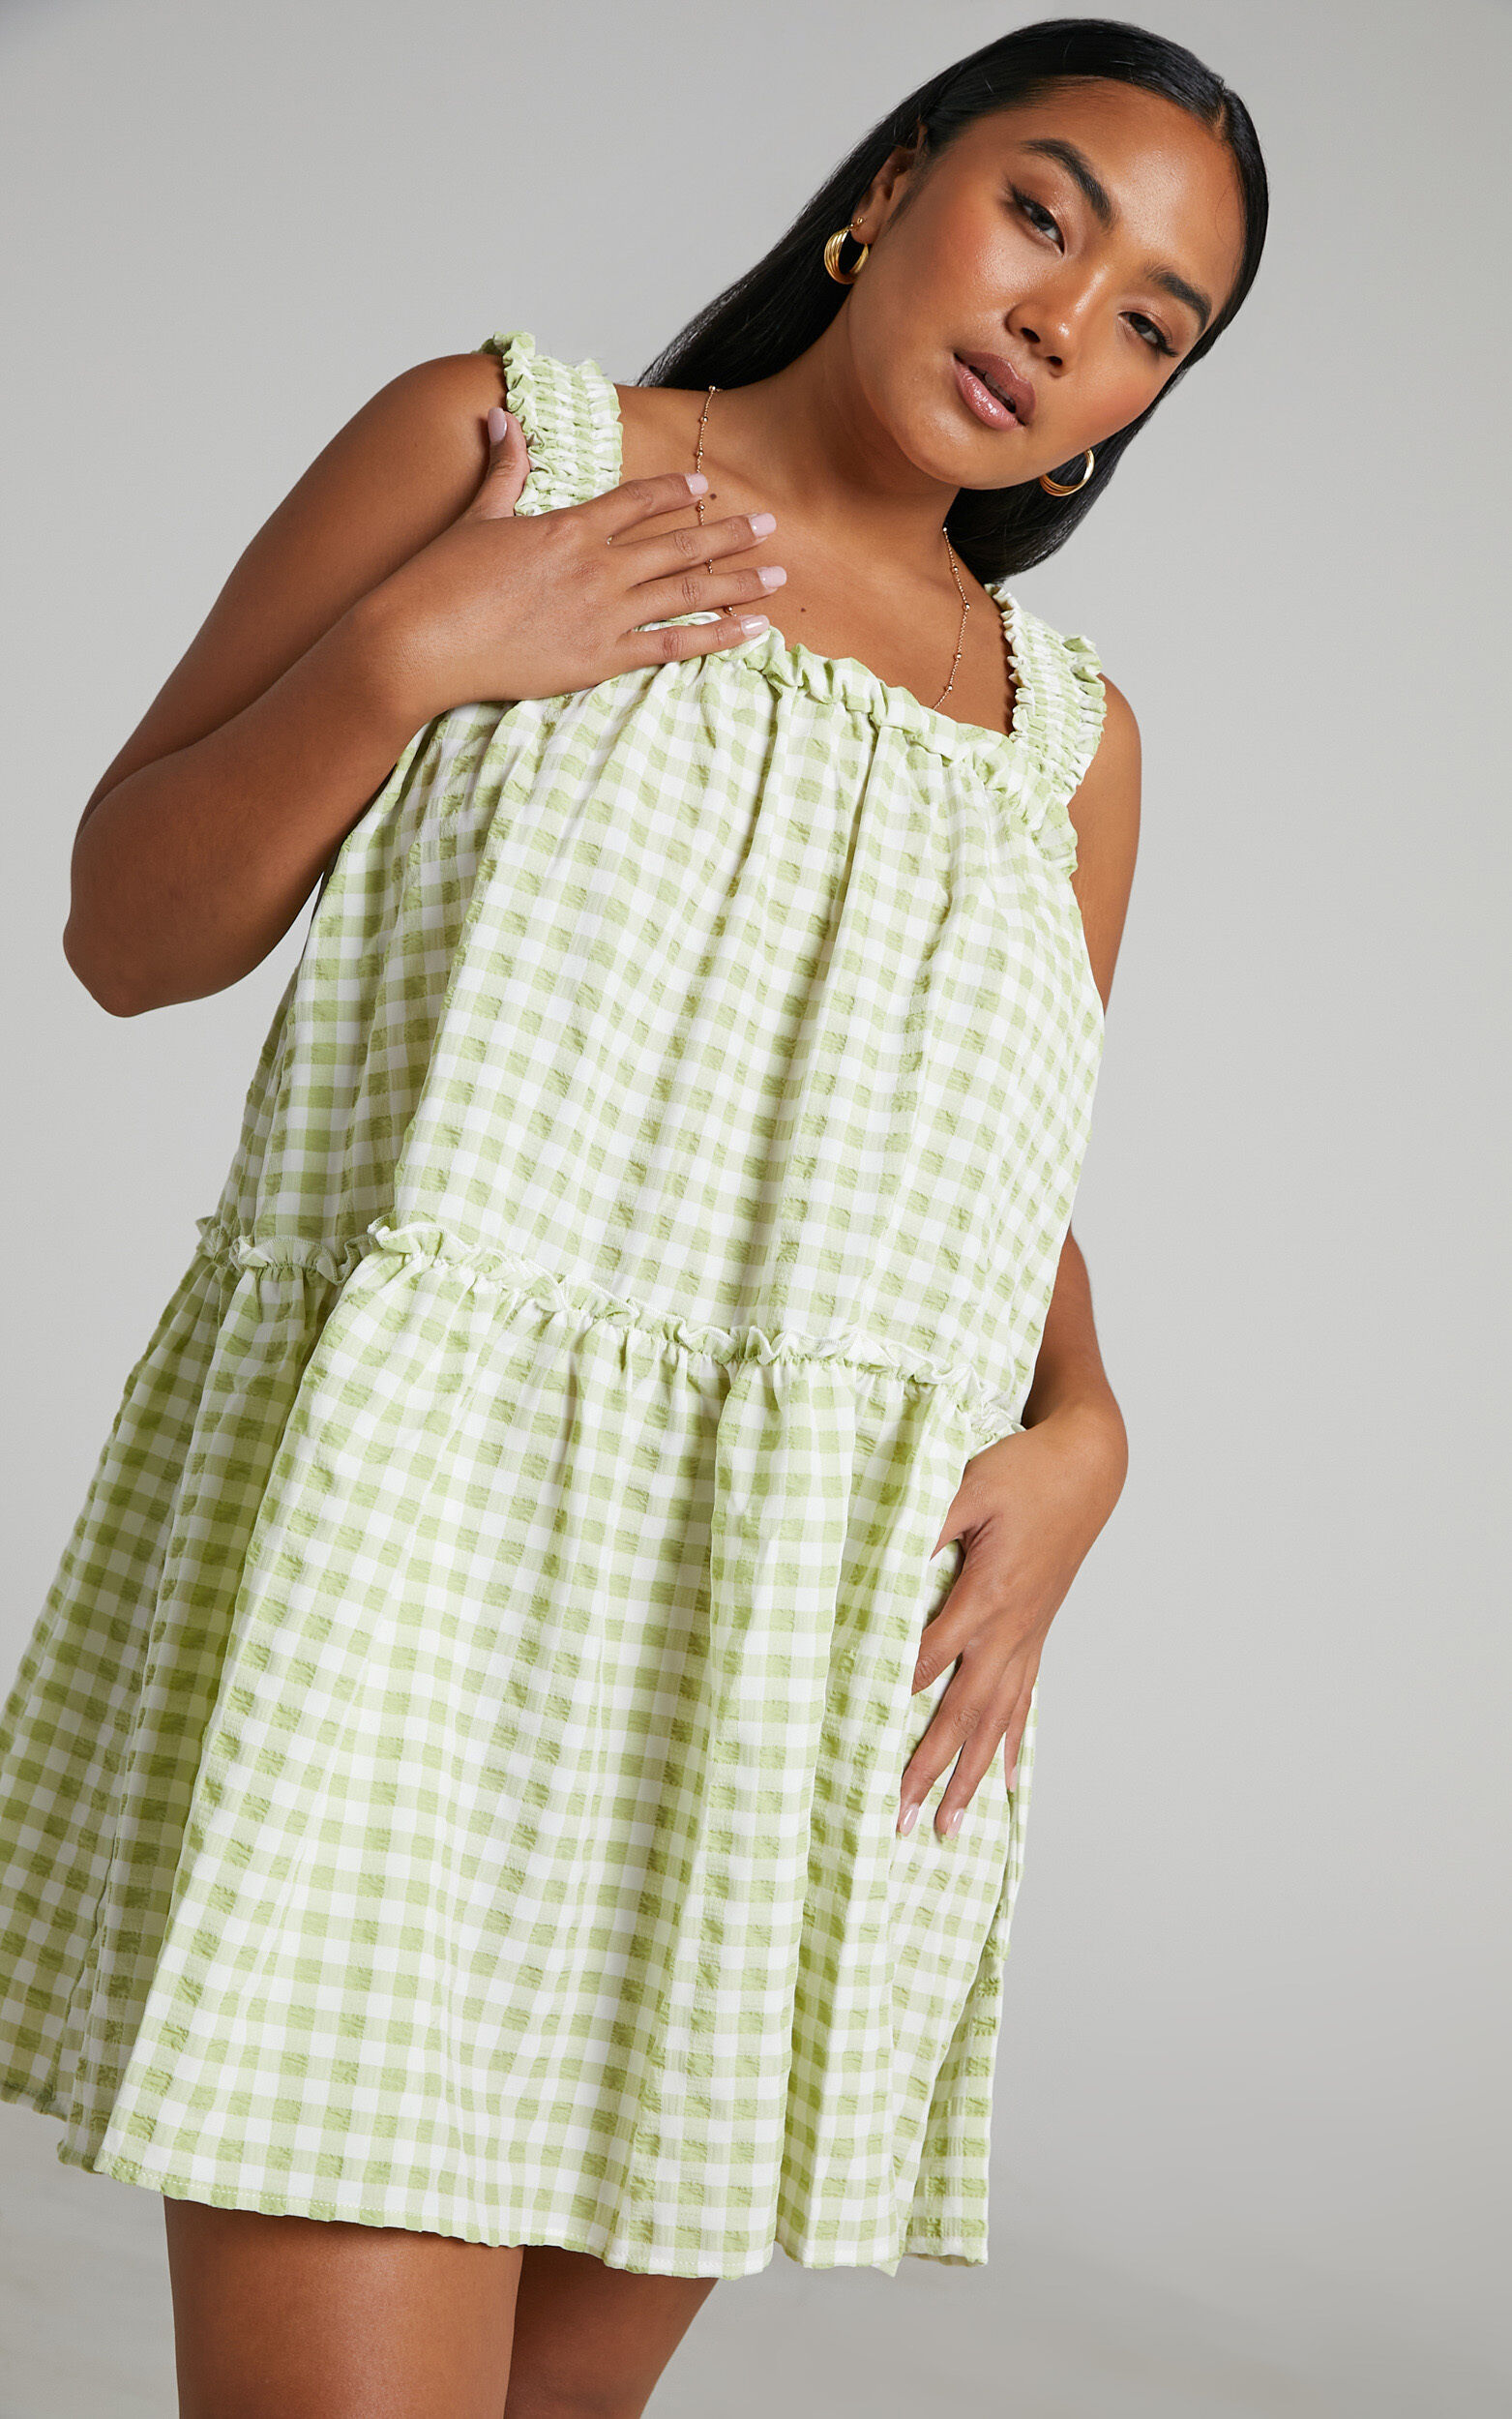 Meldzie Gingham Tiered Mini Dress in Meldzie Lime Gingham - 06, GRN1, super-hi-res image number null